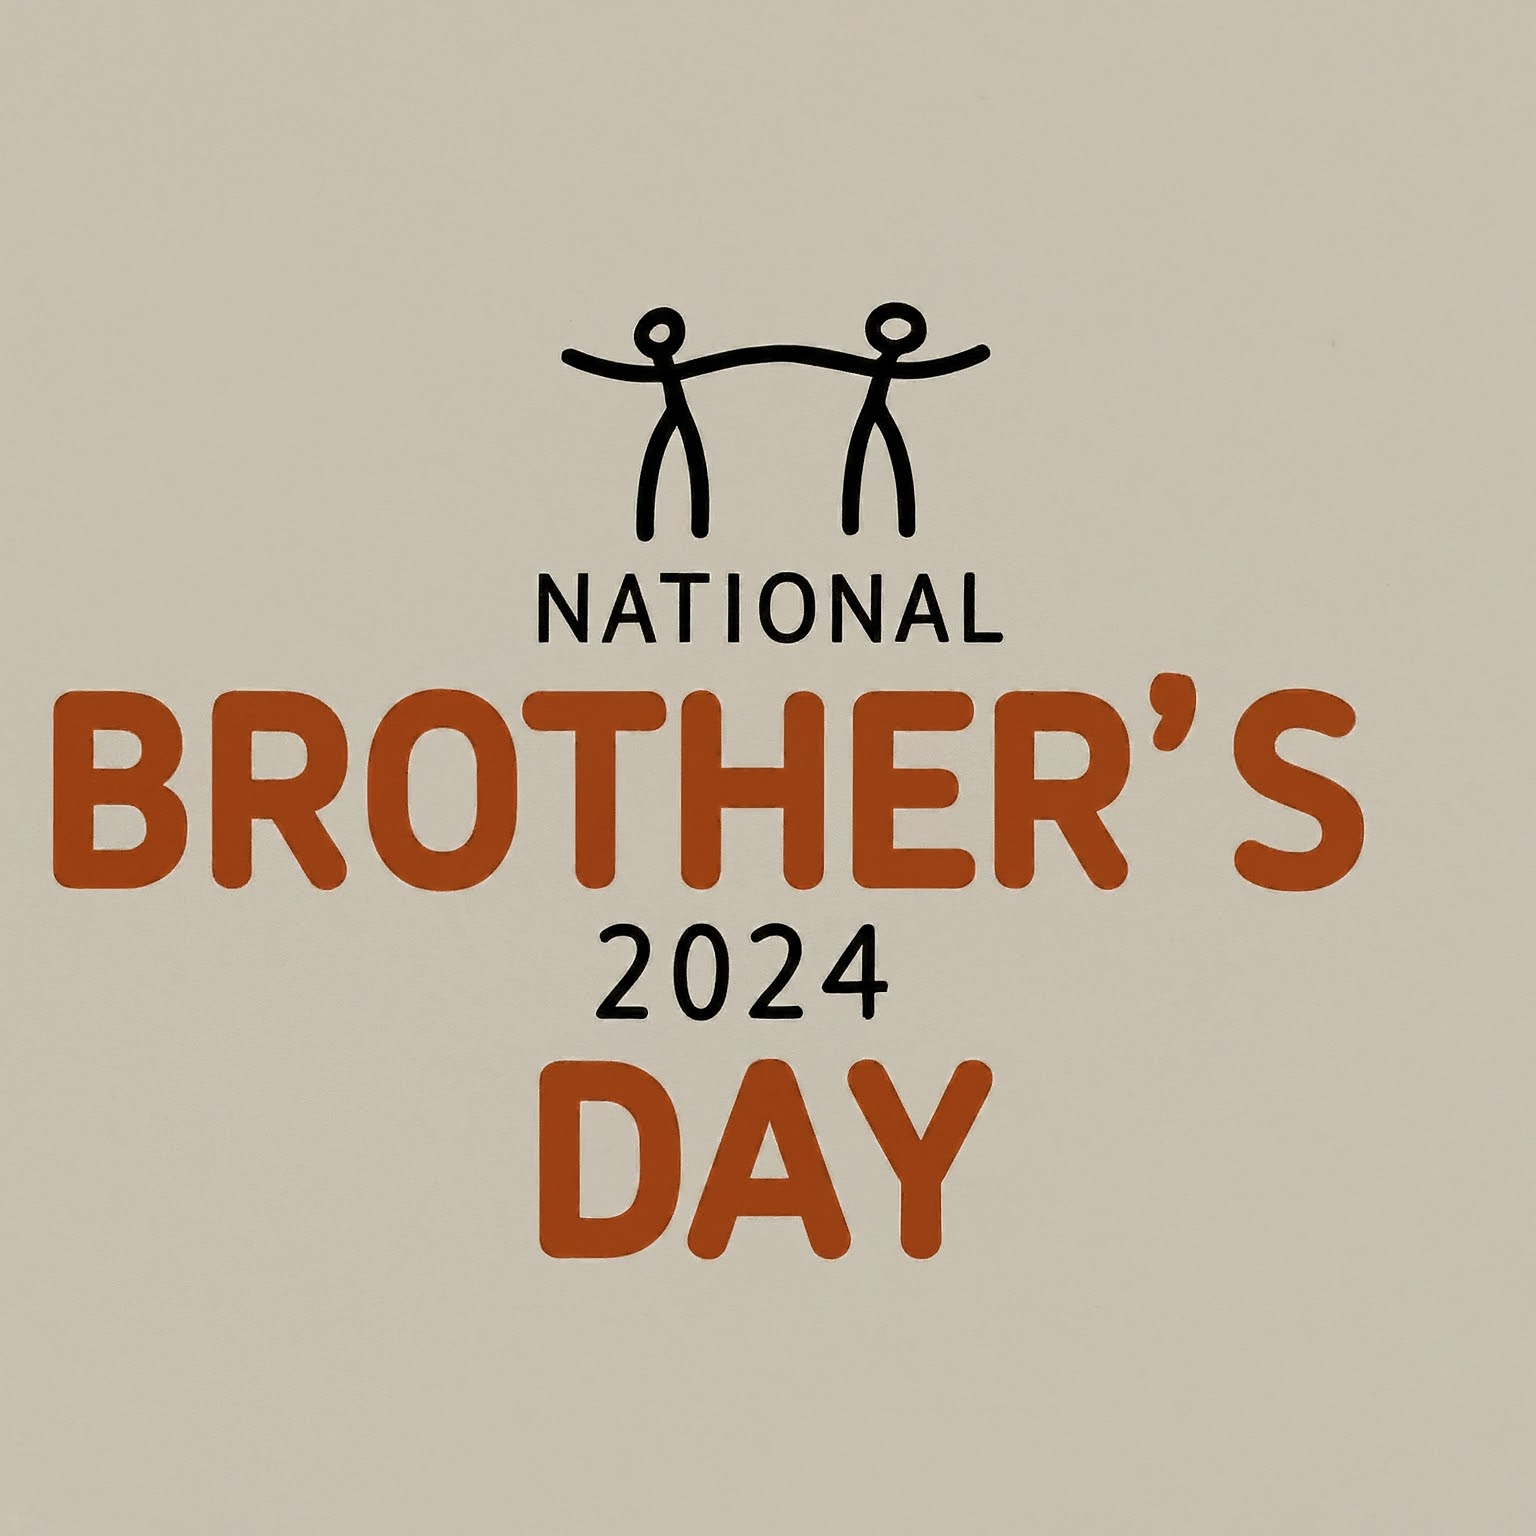 National Brother’s Day 2024: Celebrating the Unique Bond Between Siblings